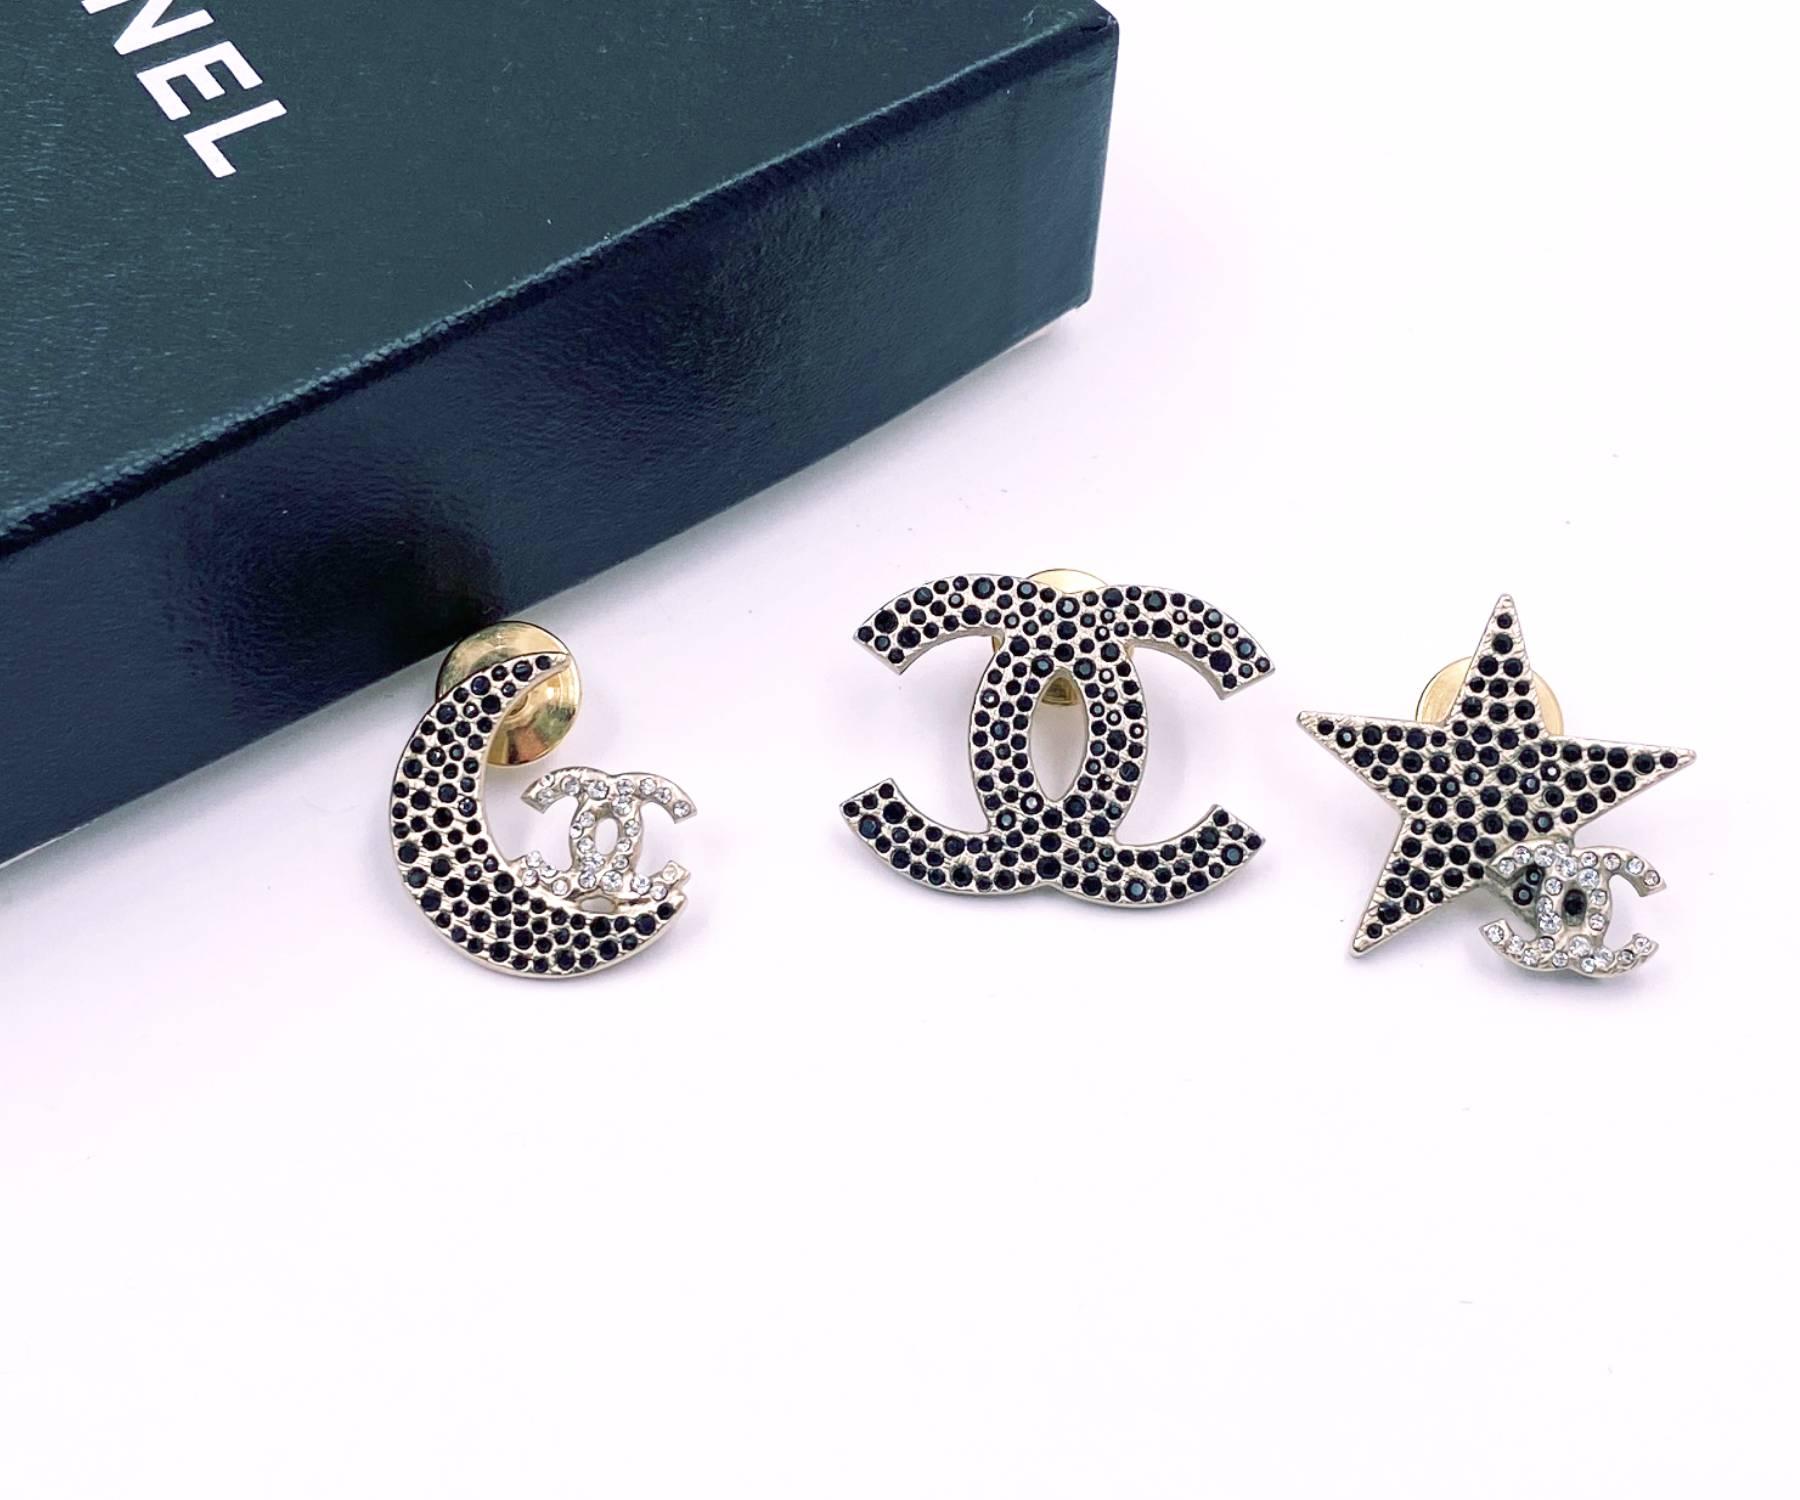 Chanel Rare Gold CC Moon Star Black Crystal 3 Pins

*Marked 08
*Made in Italy
*Comes with original box and dustbag.

-CC is approximately 1.25″ x 1″
-Star is approximately 1.1″ x 1″.
-Moon is approximately 0.9″ x 0.9″.
-Very pretty and classic
-The